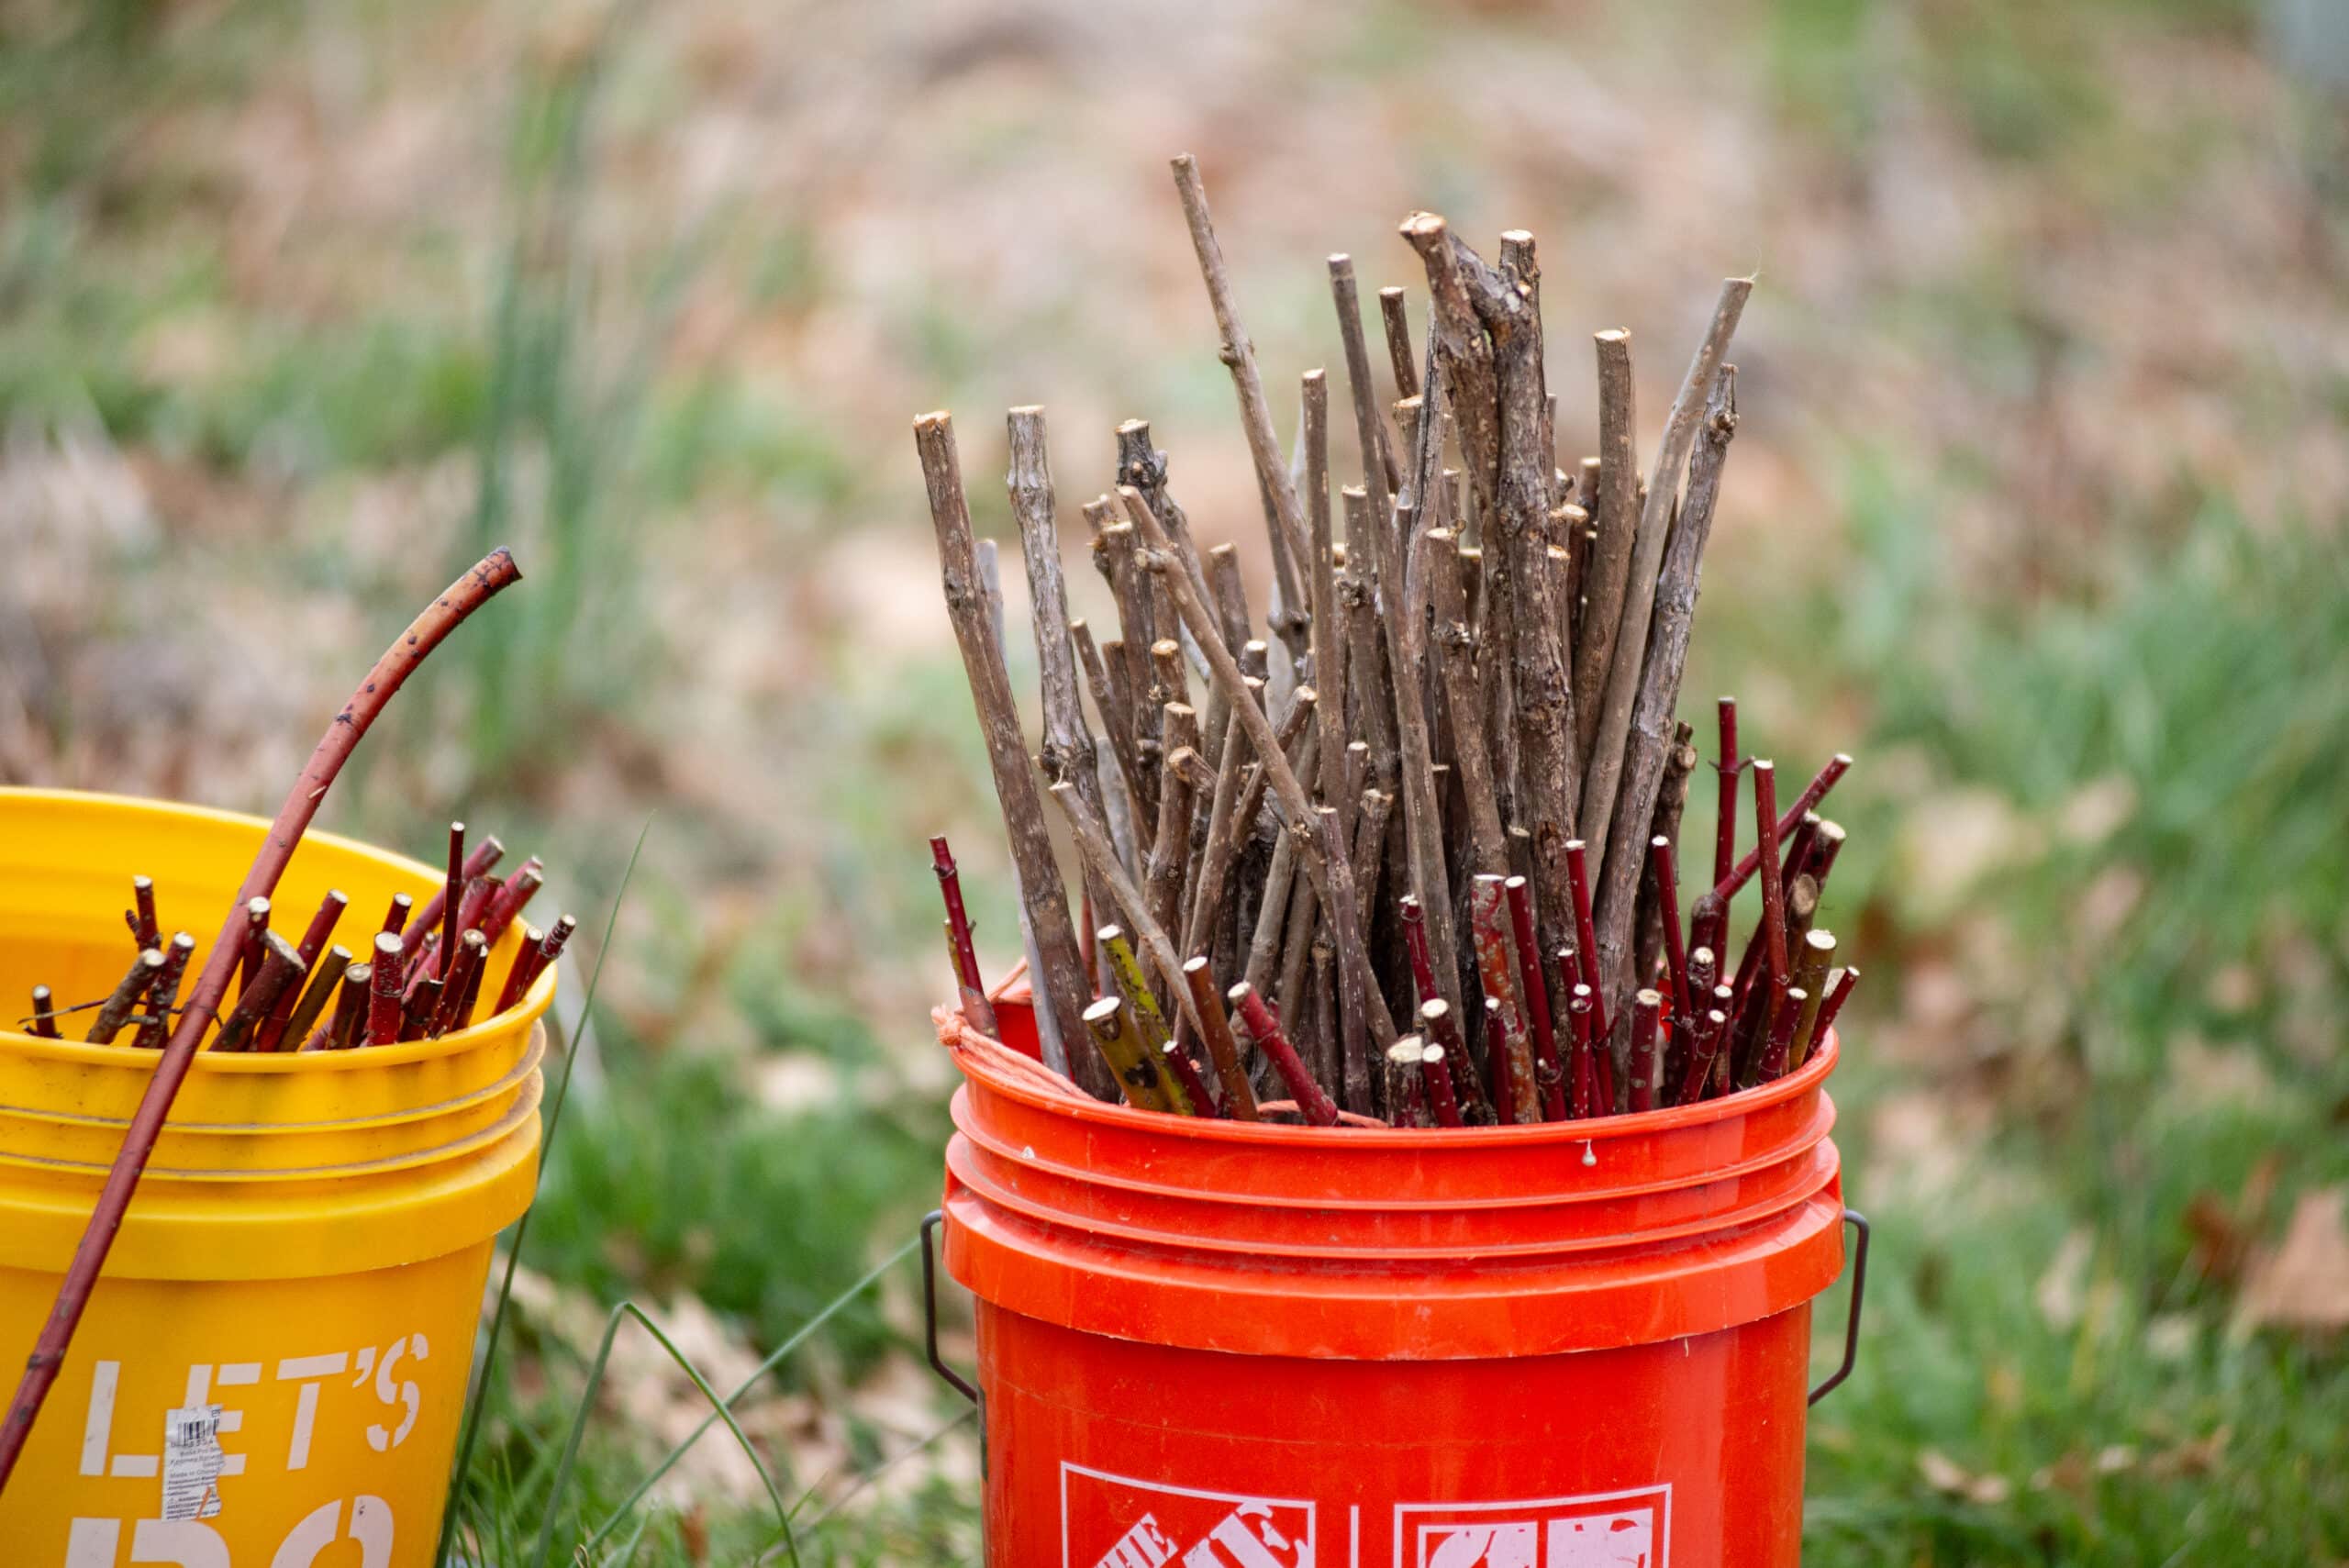 A bucket full of sticks, used as live stakes